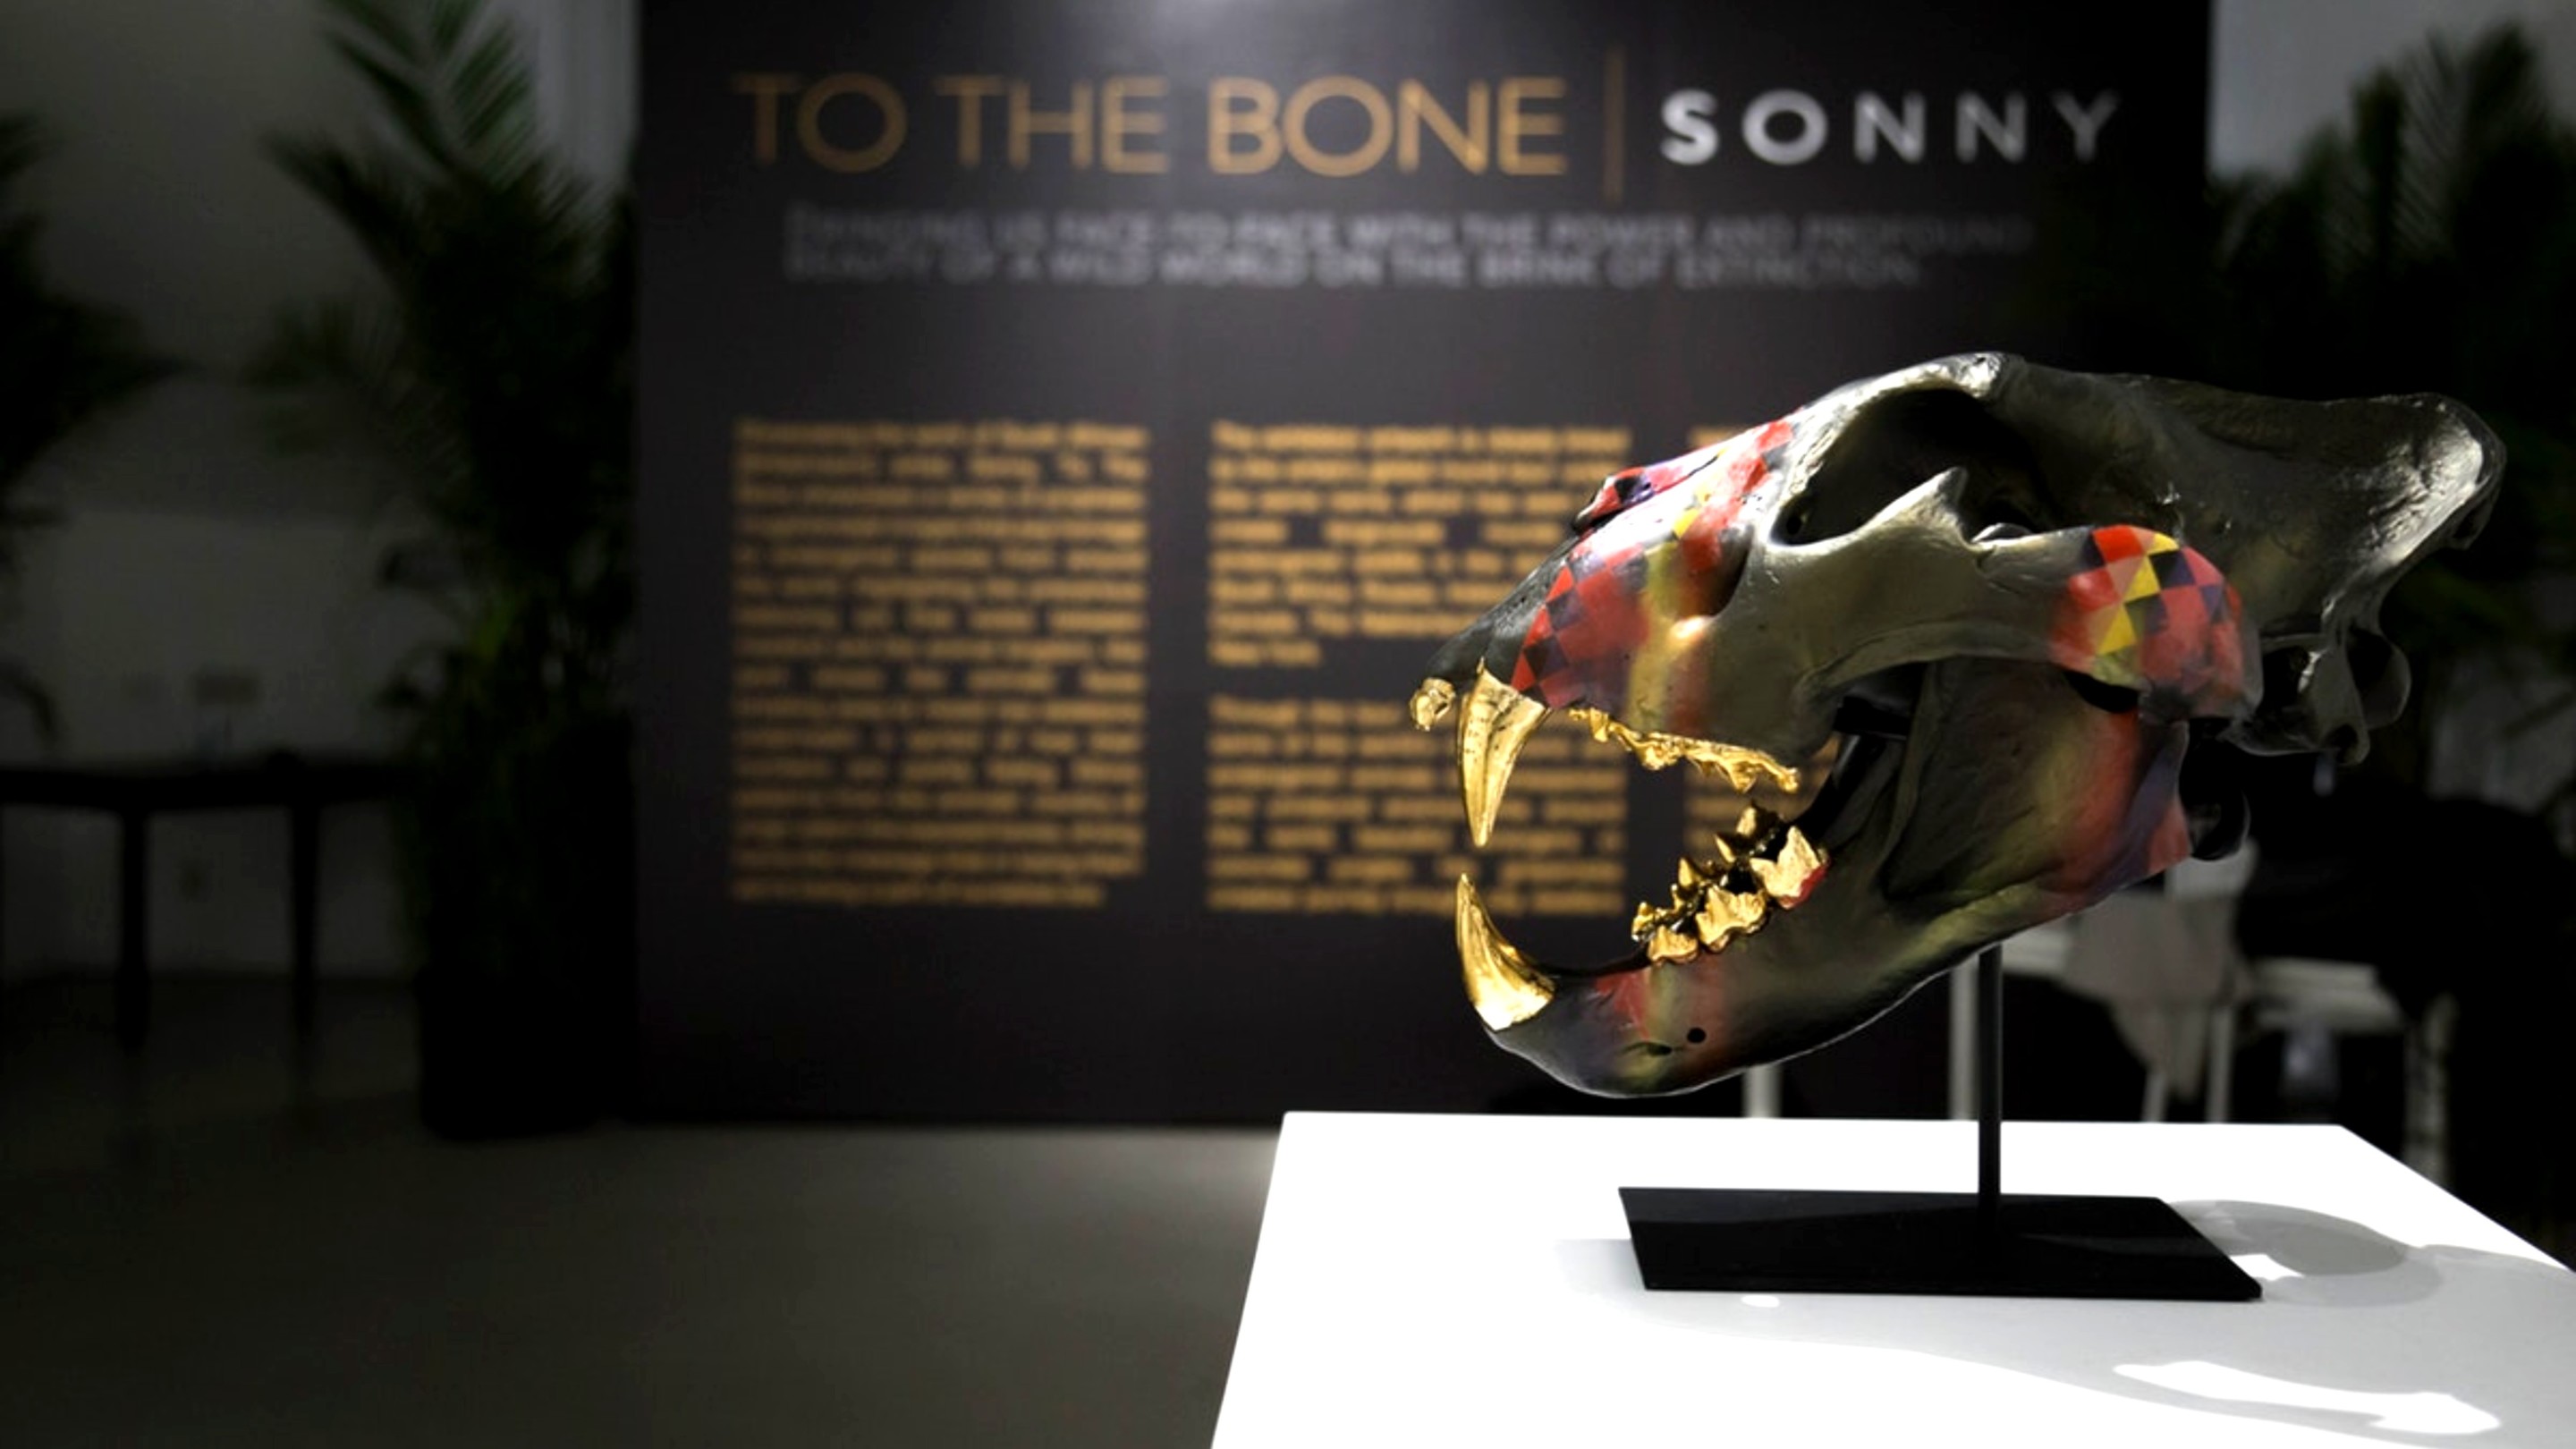 Setup of Sonny's To The Bone exhibition in New York